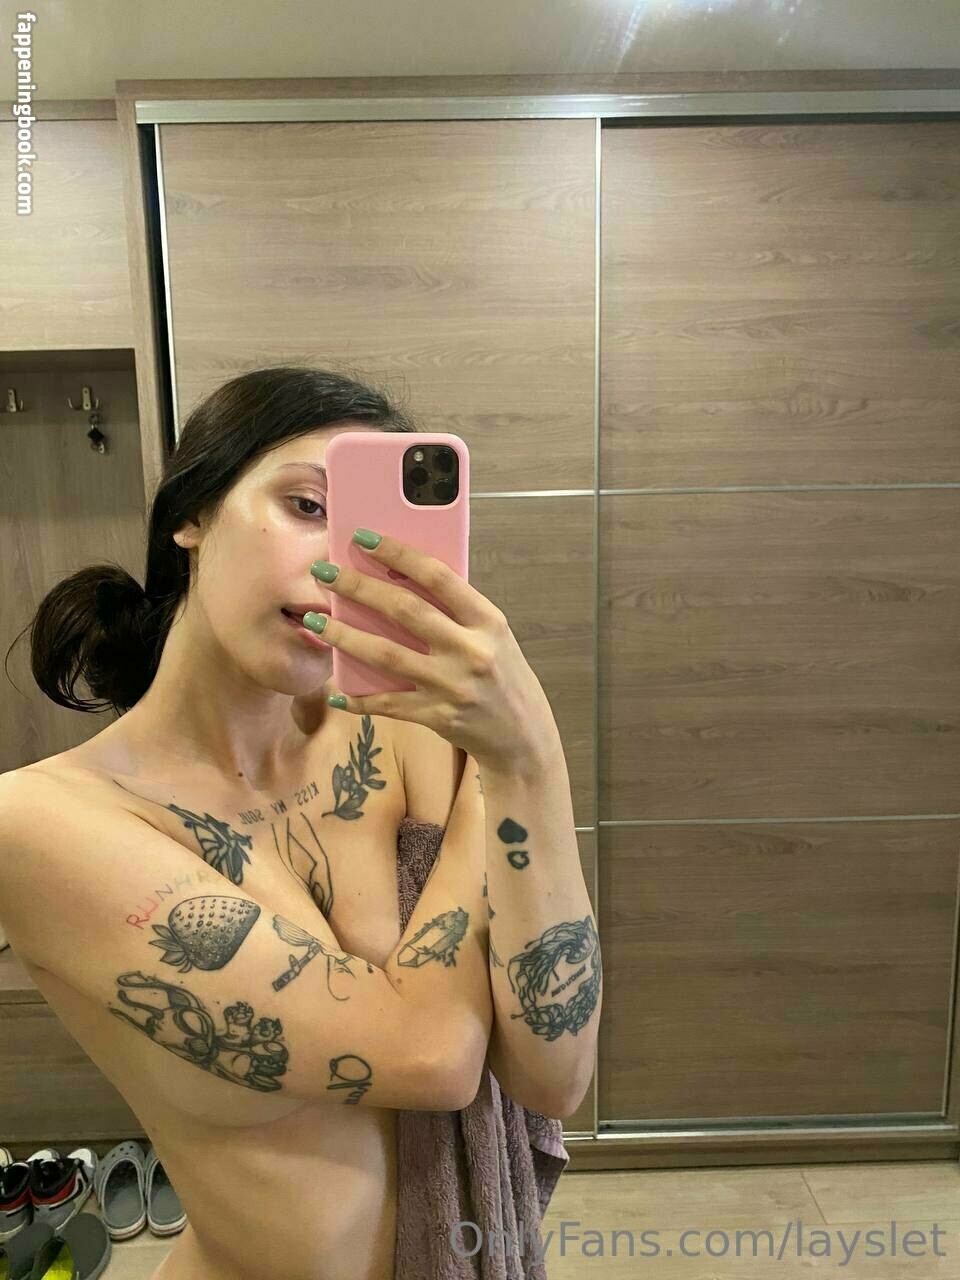 layslet onlyfans the fappening fappeningbook